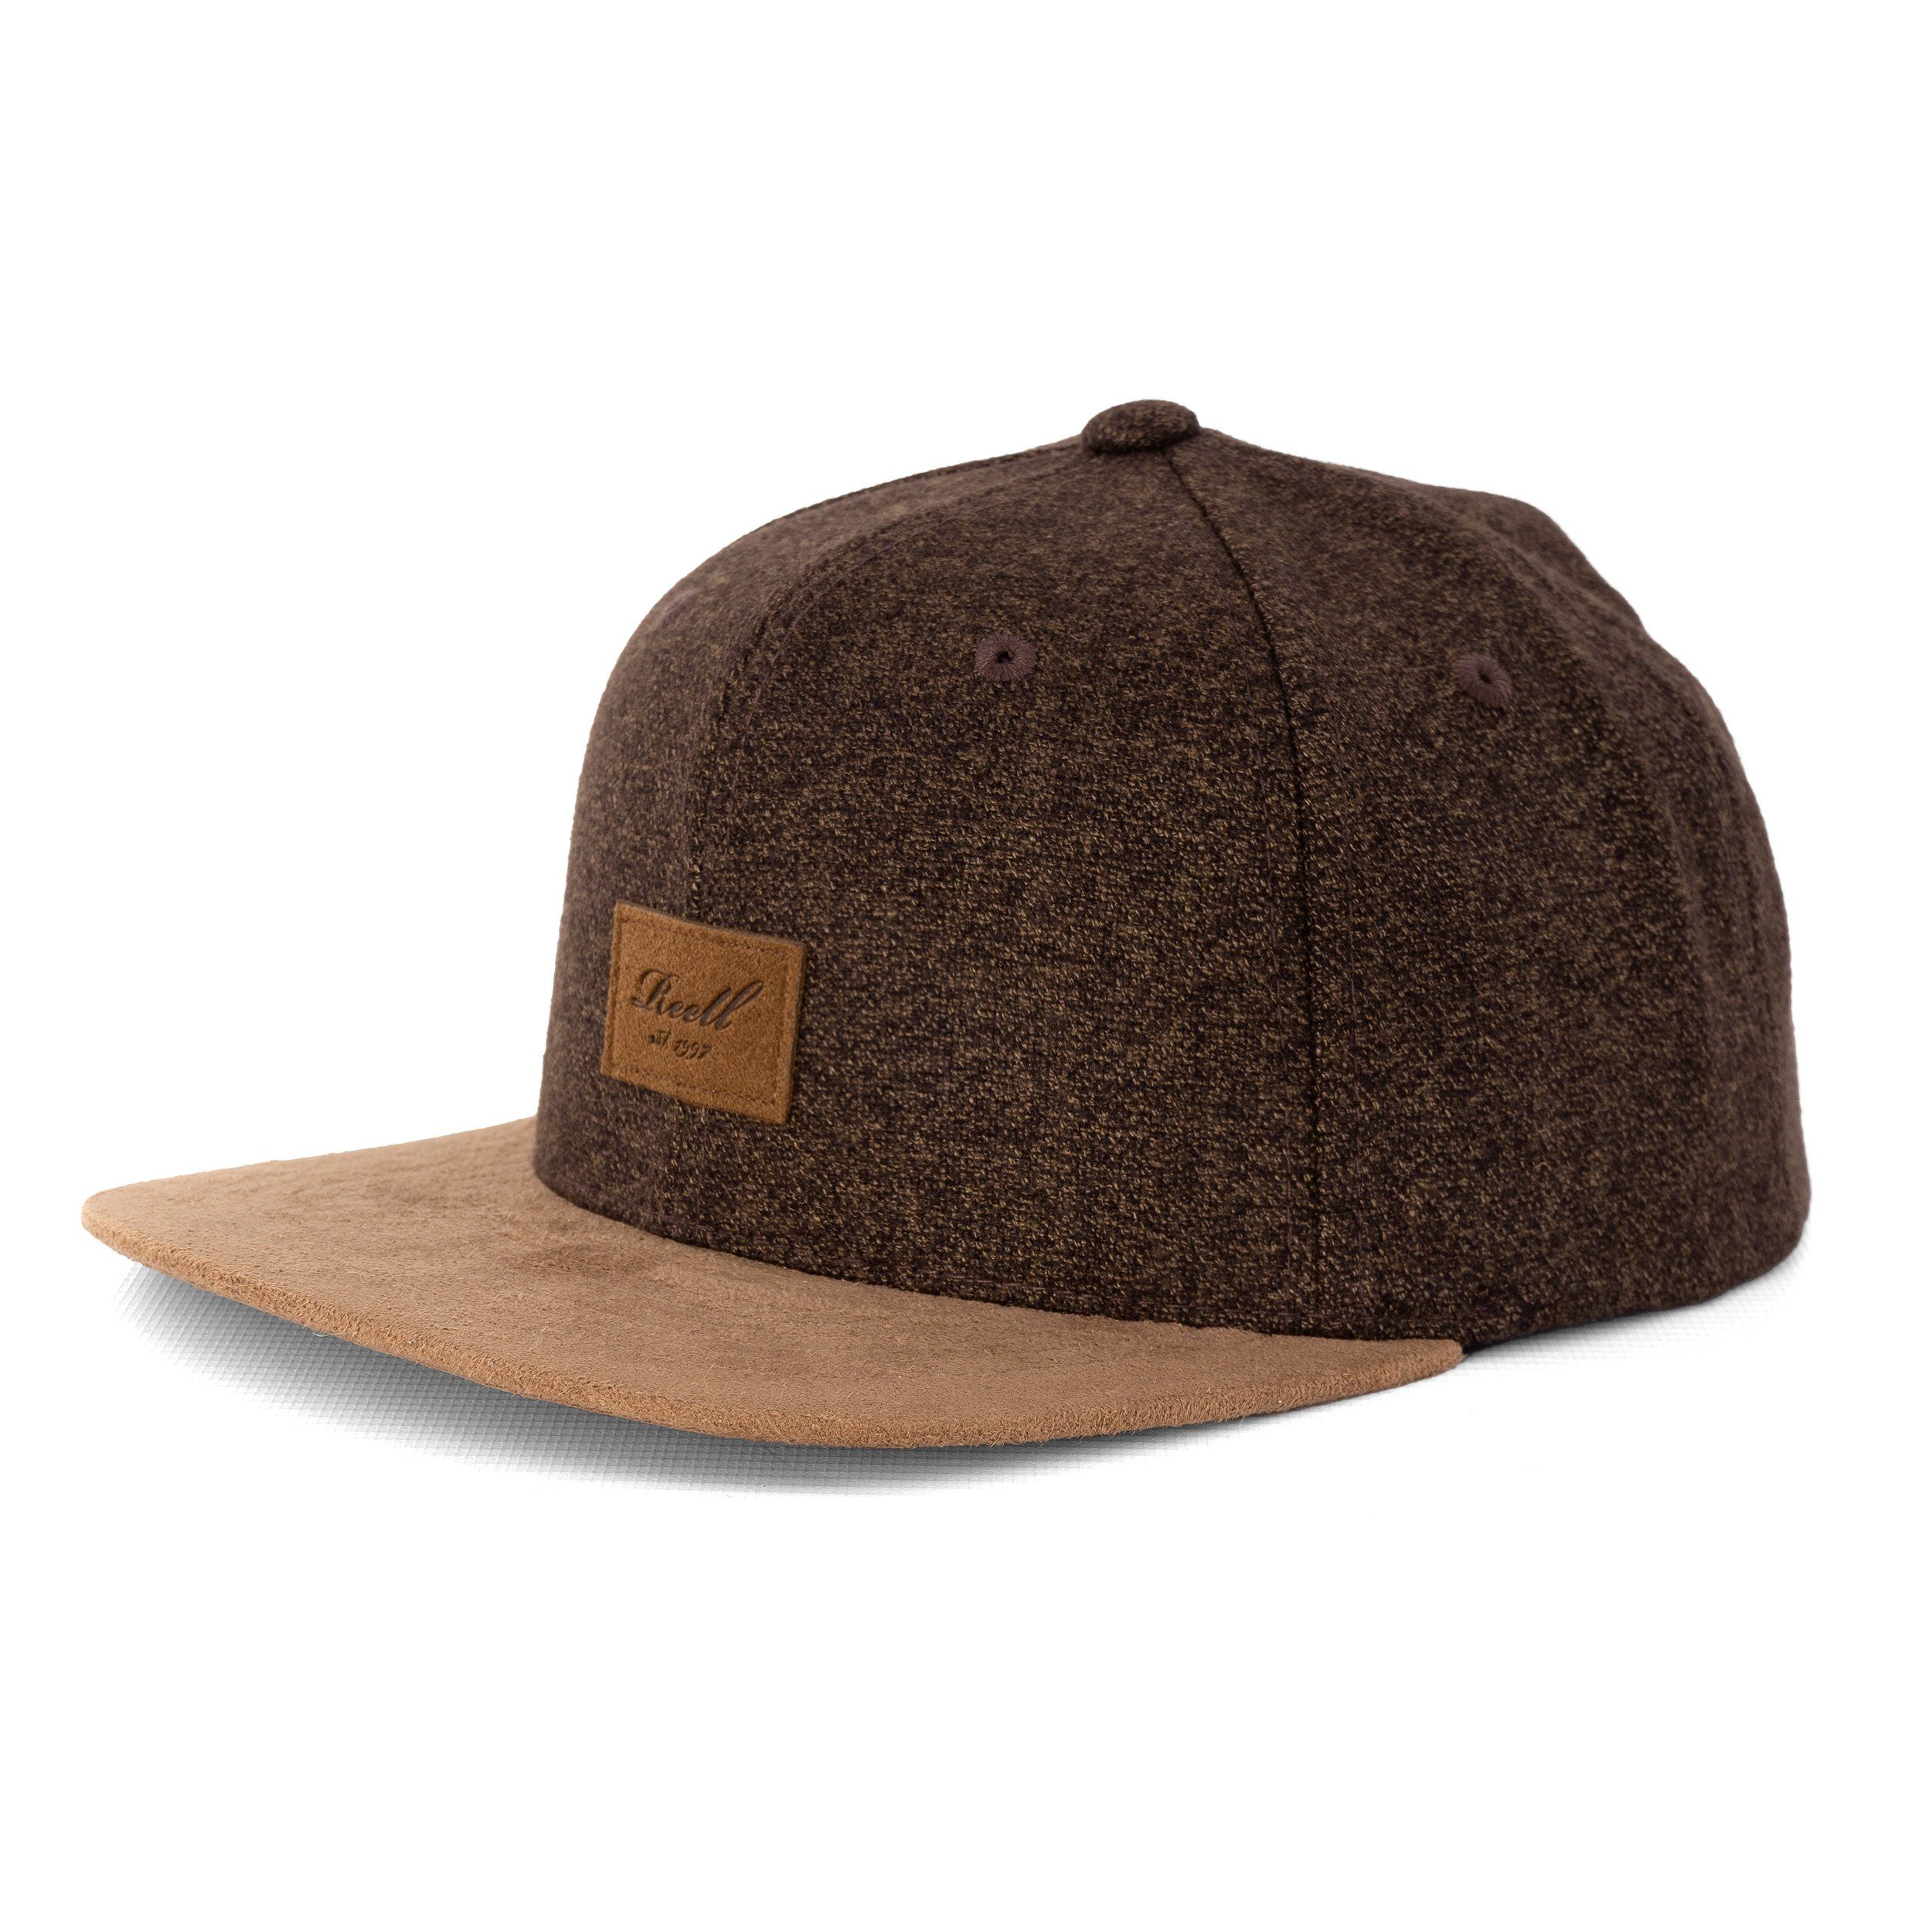 REELL Baseball Cap Cap Reell Suede (1-St) heat.olive